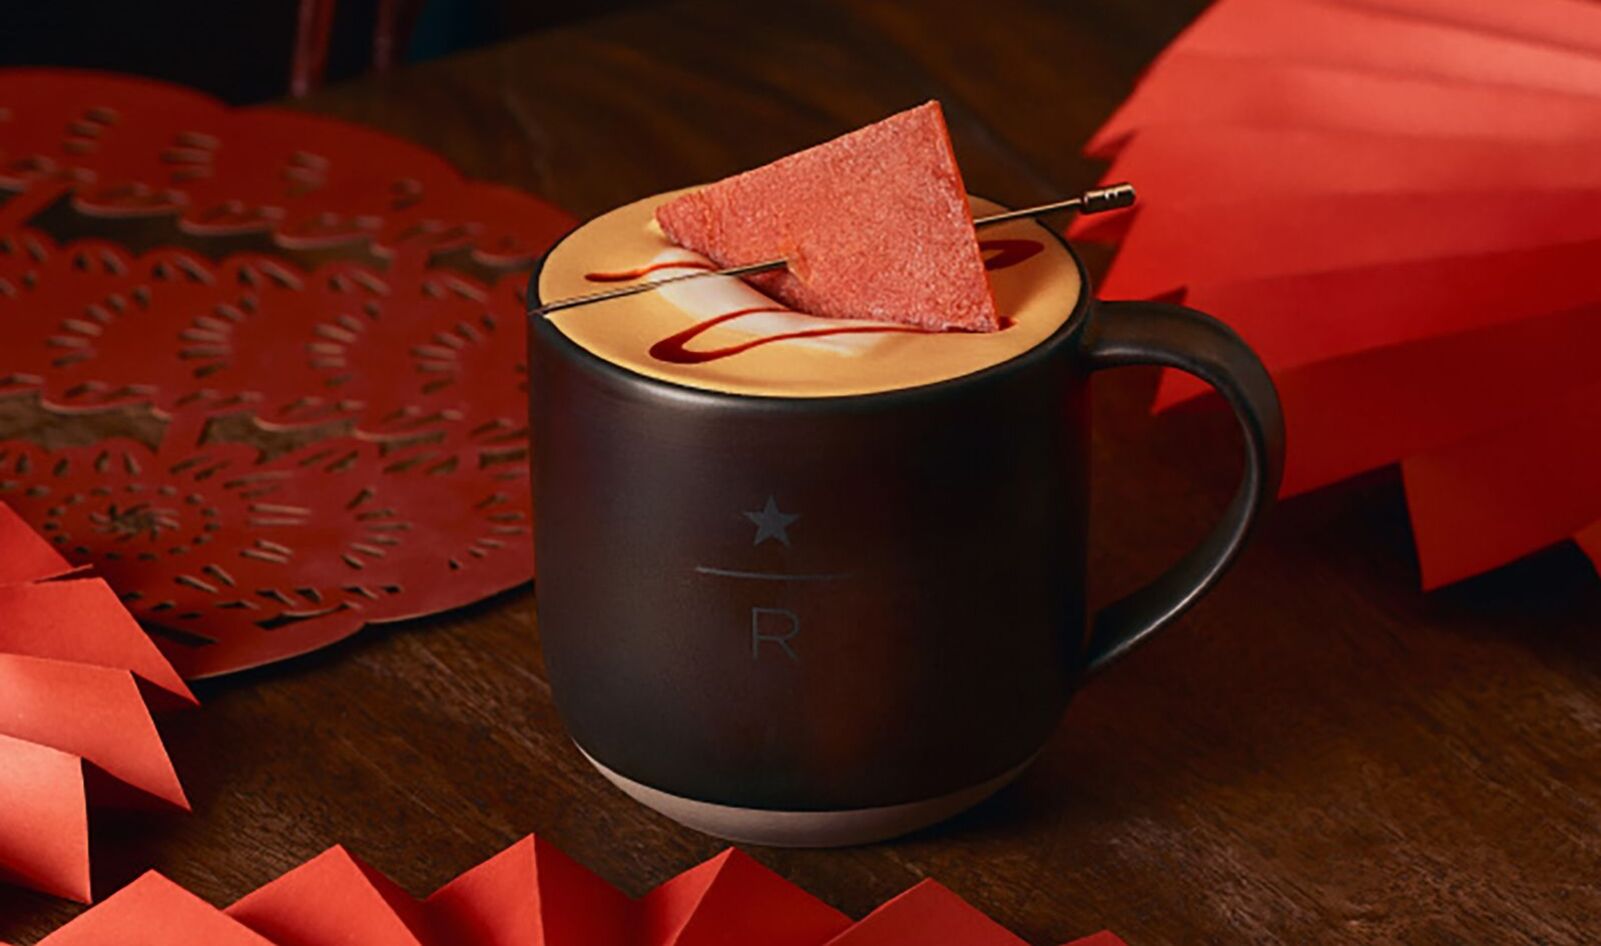 Yes, You Can Get Starbucks' New "Abundant Year Savory Latte" With Oat Milk, But What About That Giant Hunk of Pork?